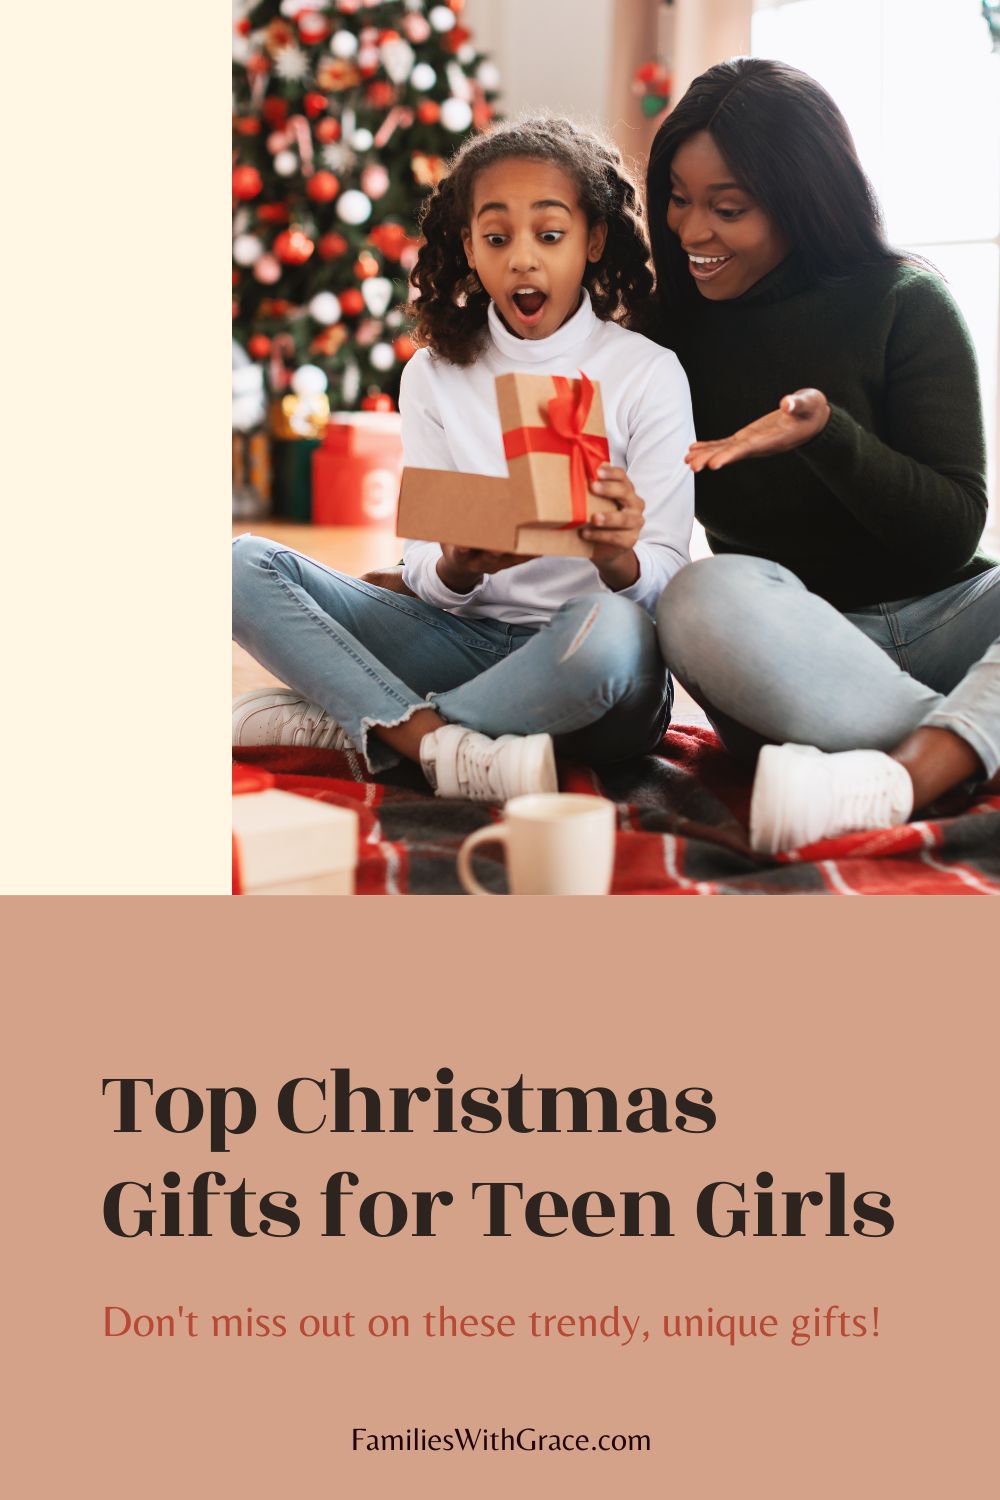 The Best Gifts for 14 Year Old Girls